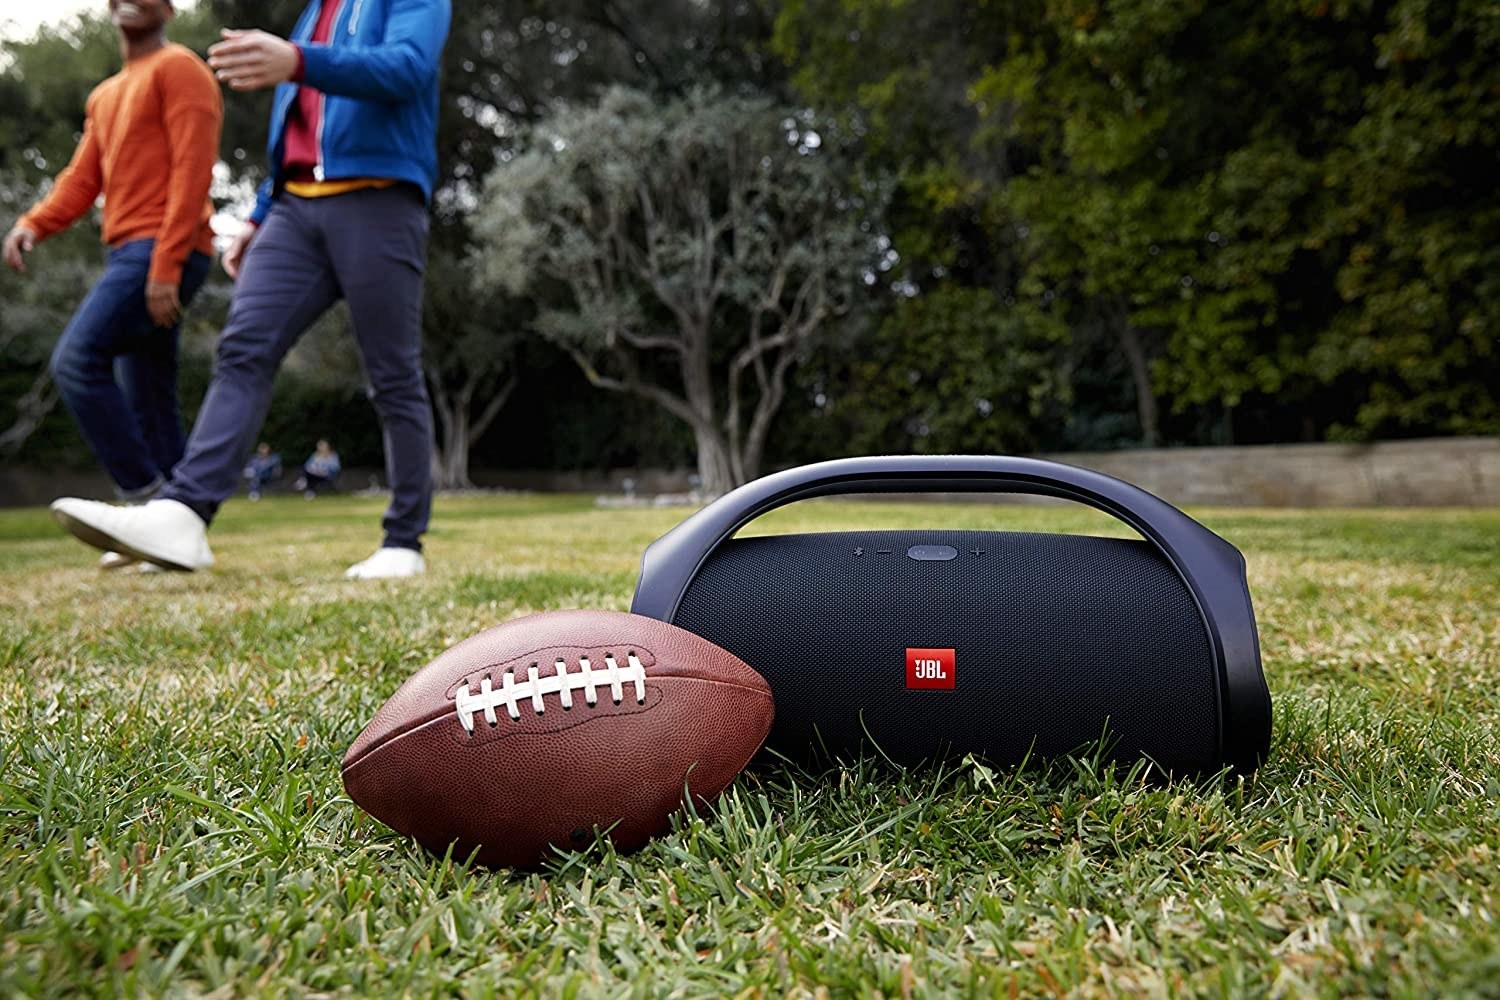 A large boombox speaker on the grass next to a football